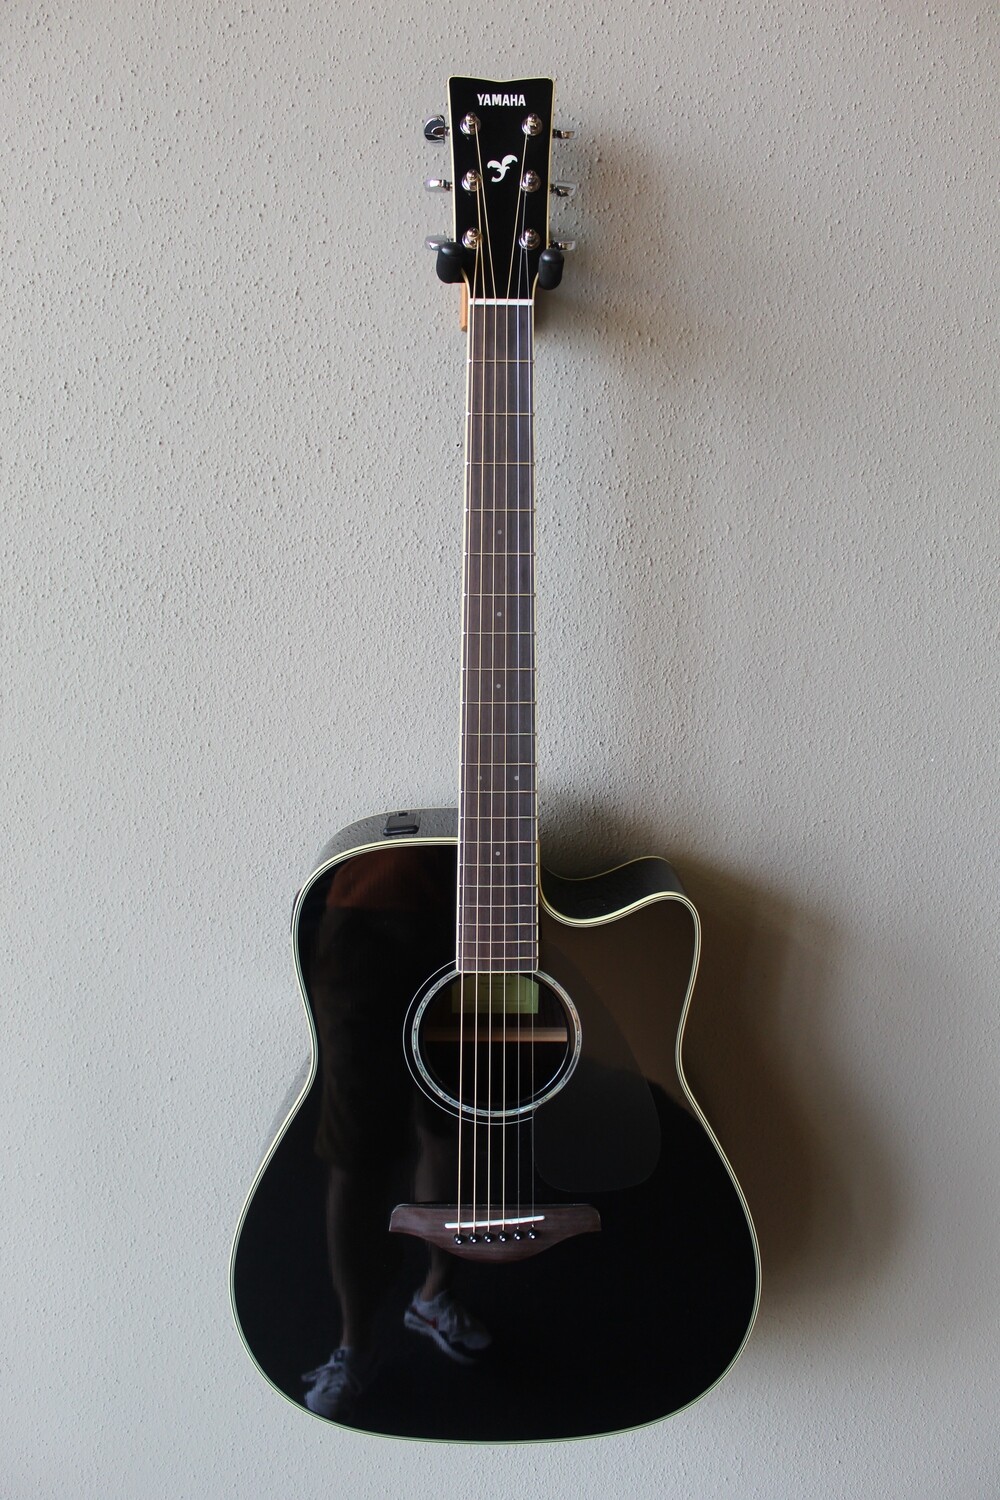 Yamaha FGX830C Dreadnought Acoustic/Electric Guitar with Gig Bag - Black